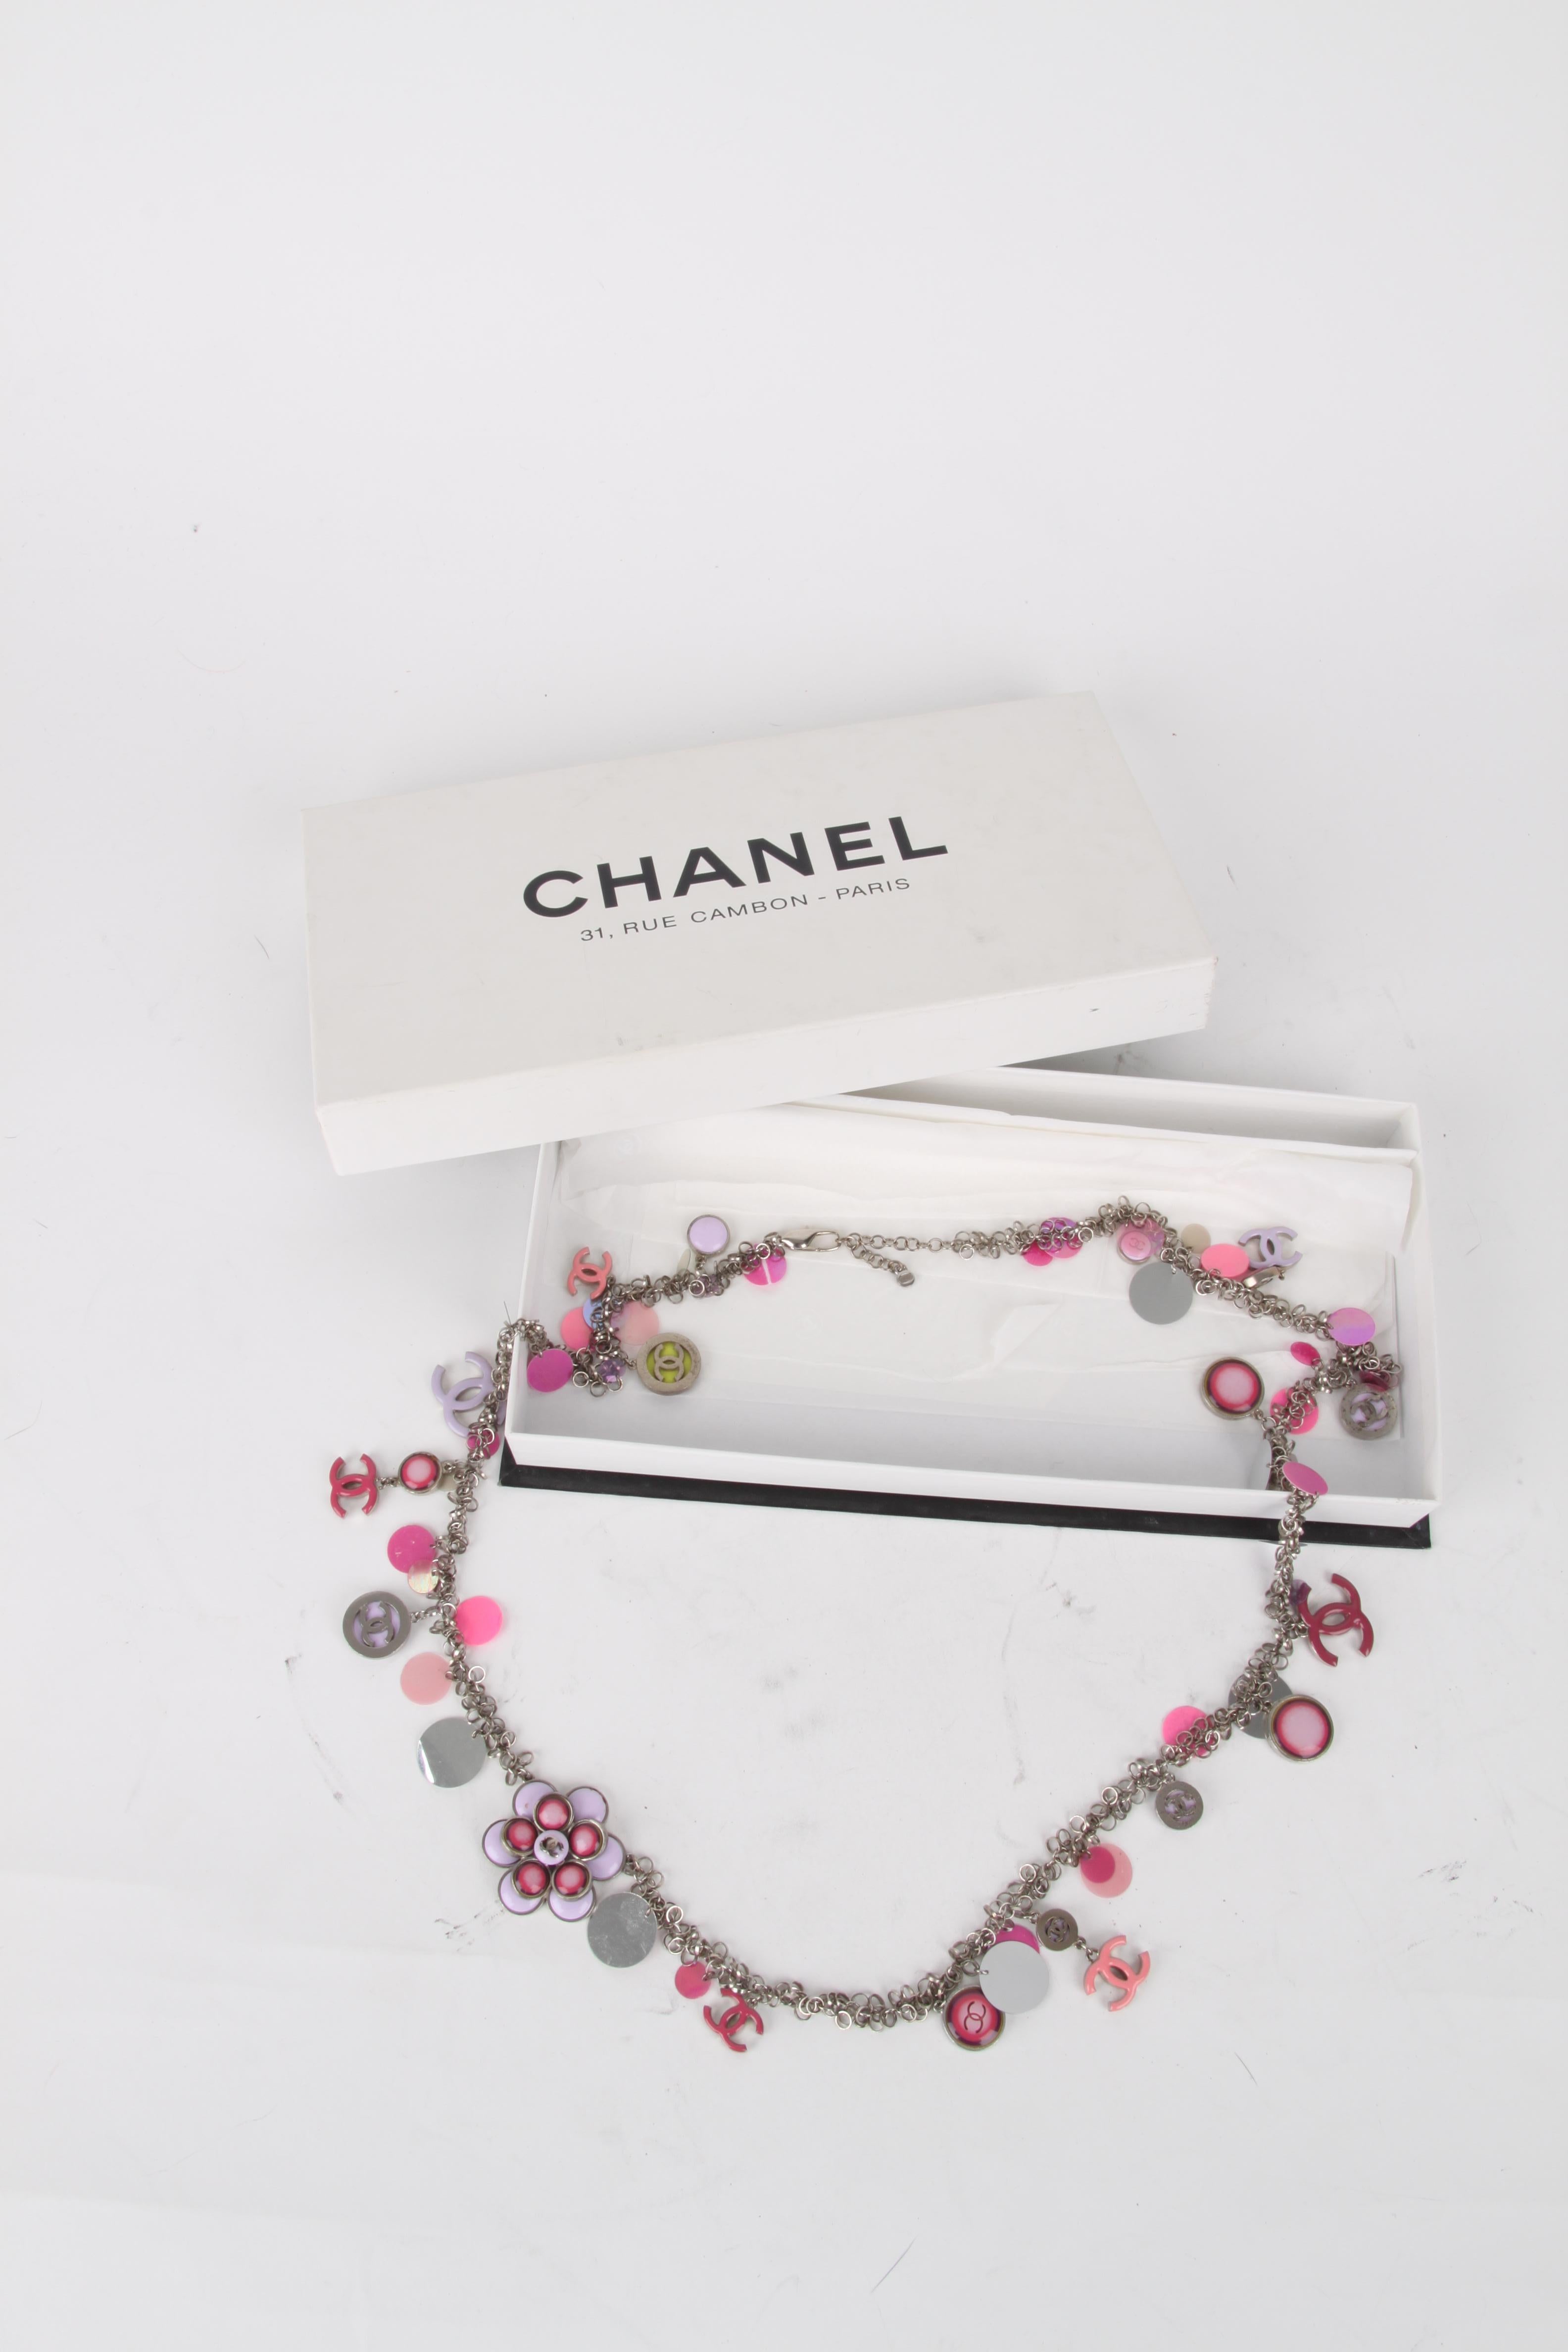 Chanel 2004 Fall/Winter (04P) Pink Silver Sequins Embellished Necklace/Belt.

This necklace features a lux CC-logo embellished exterior with pink and purple enamel finish. The necklace features a silver hook fastening velcro fastening with the